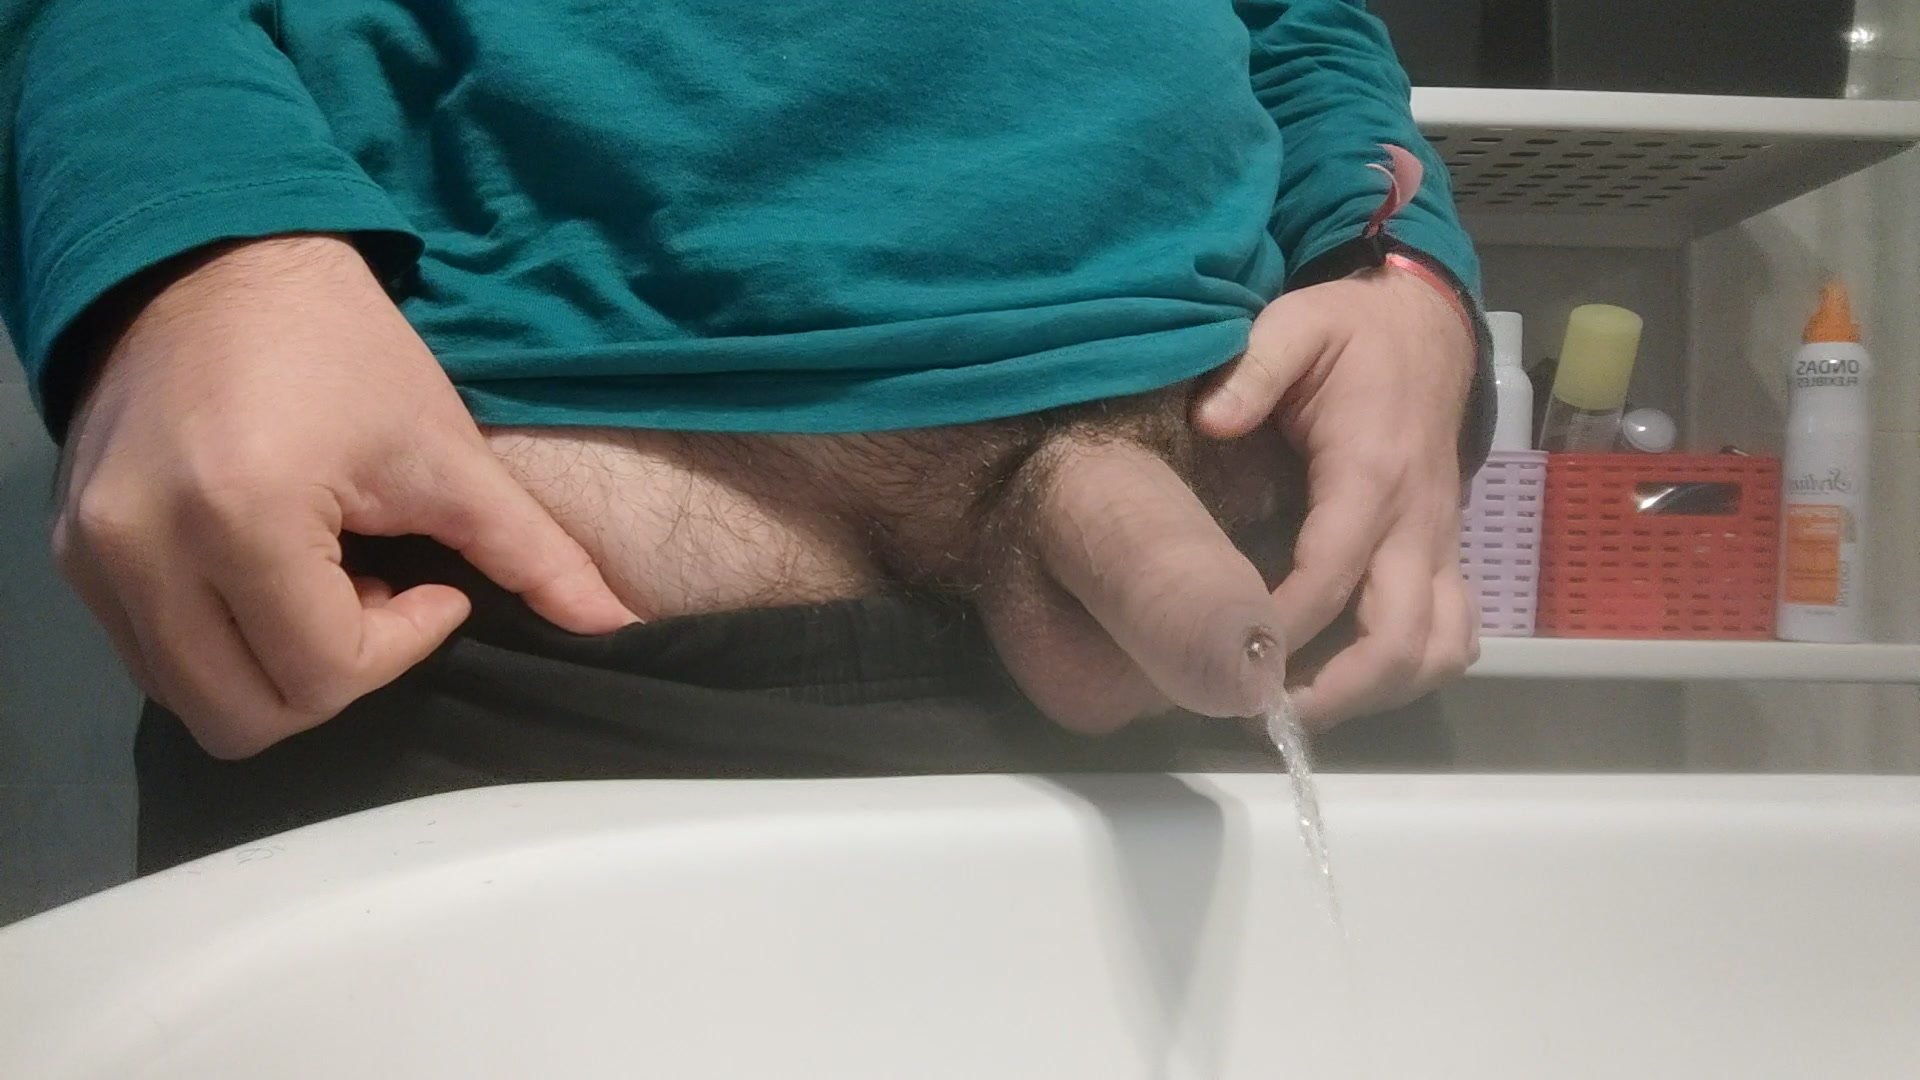 Teen Guy piss on sink with foreskin